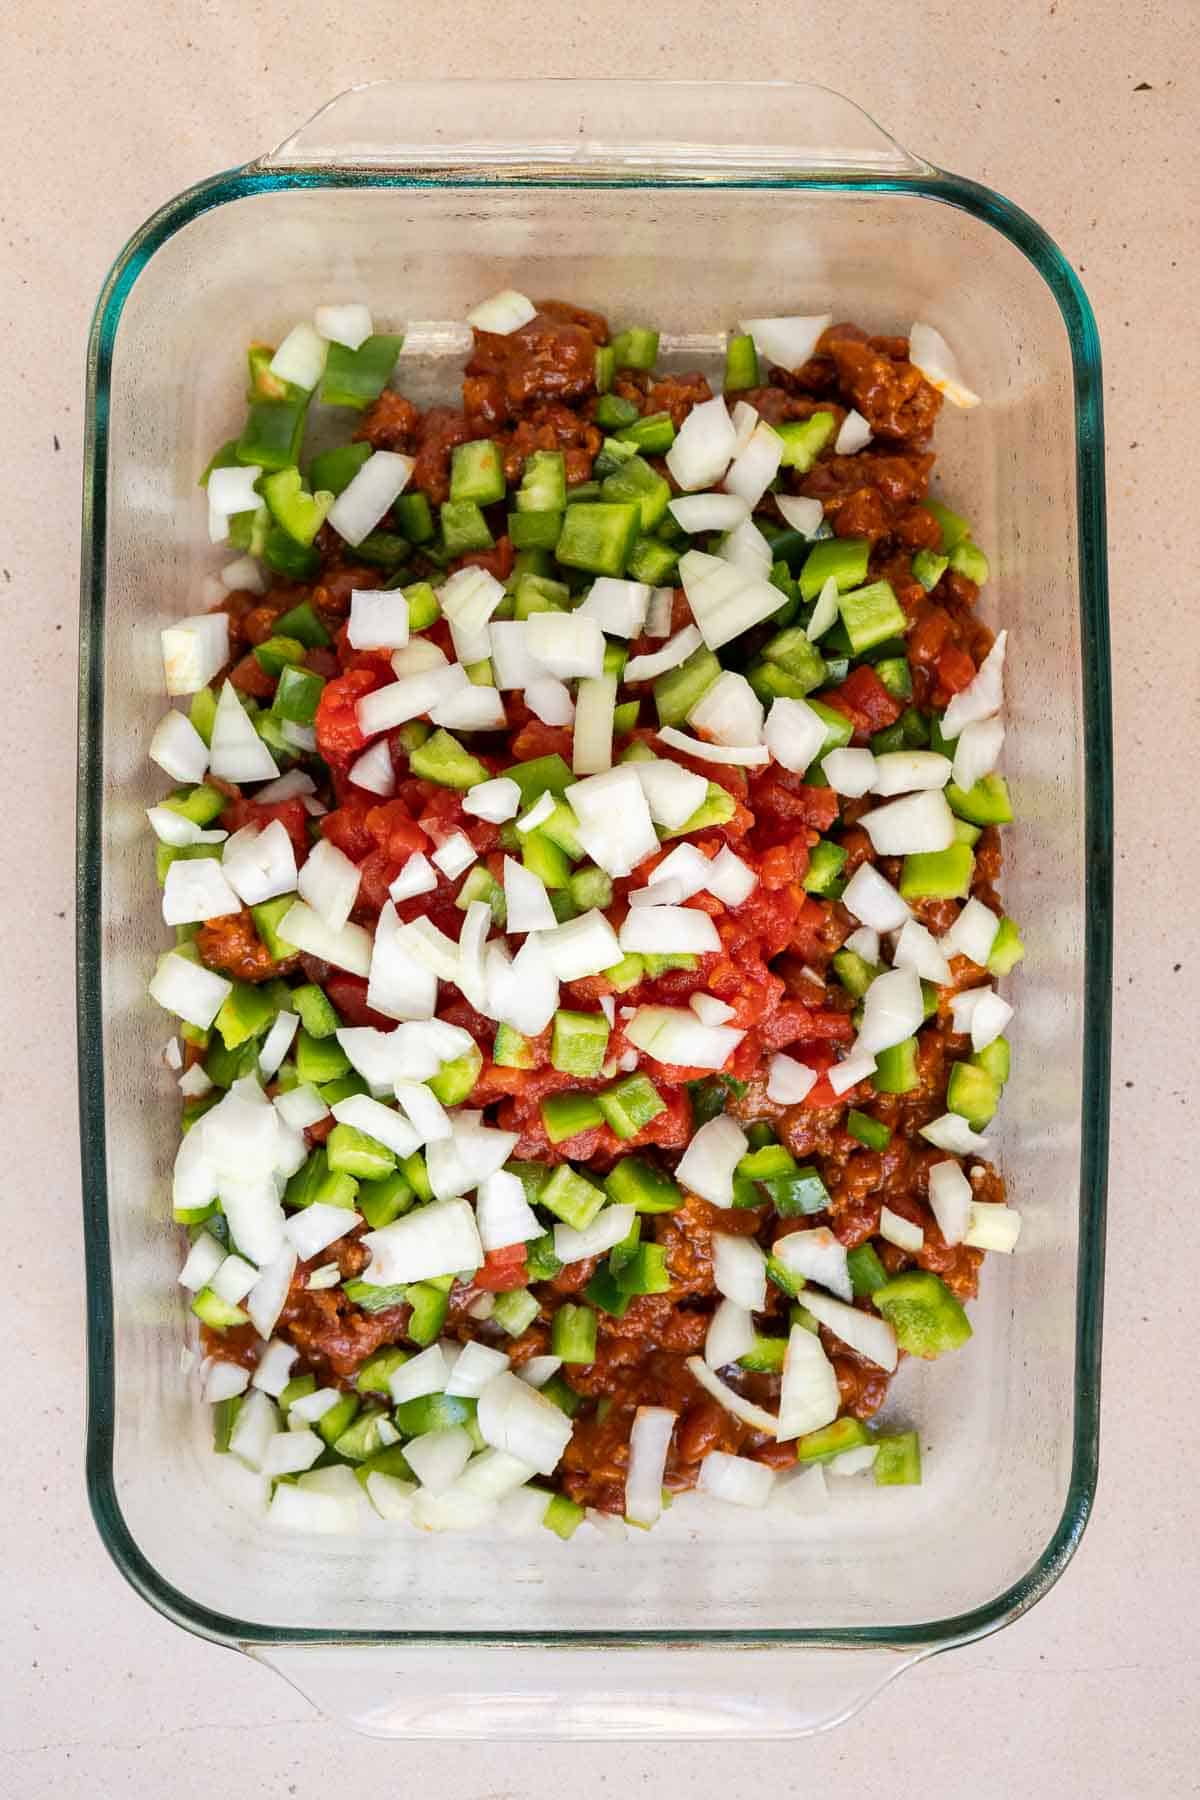 The canned chili and diced veggies are added directly to a 9 by 13 inch baking dish.